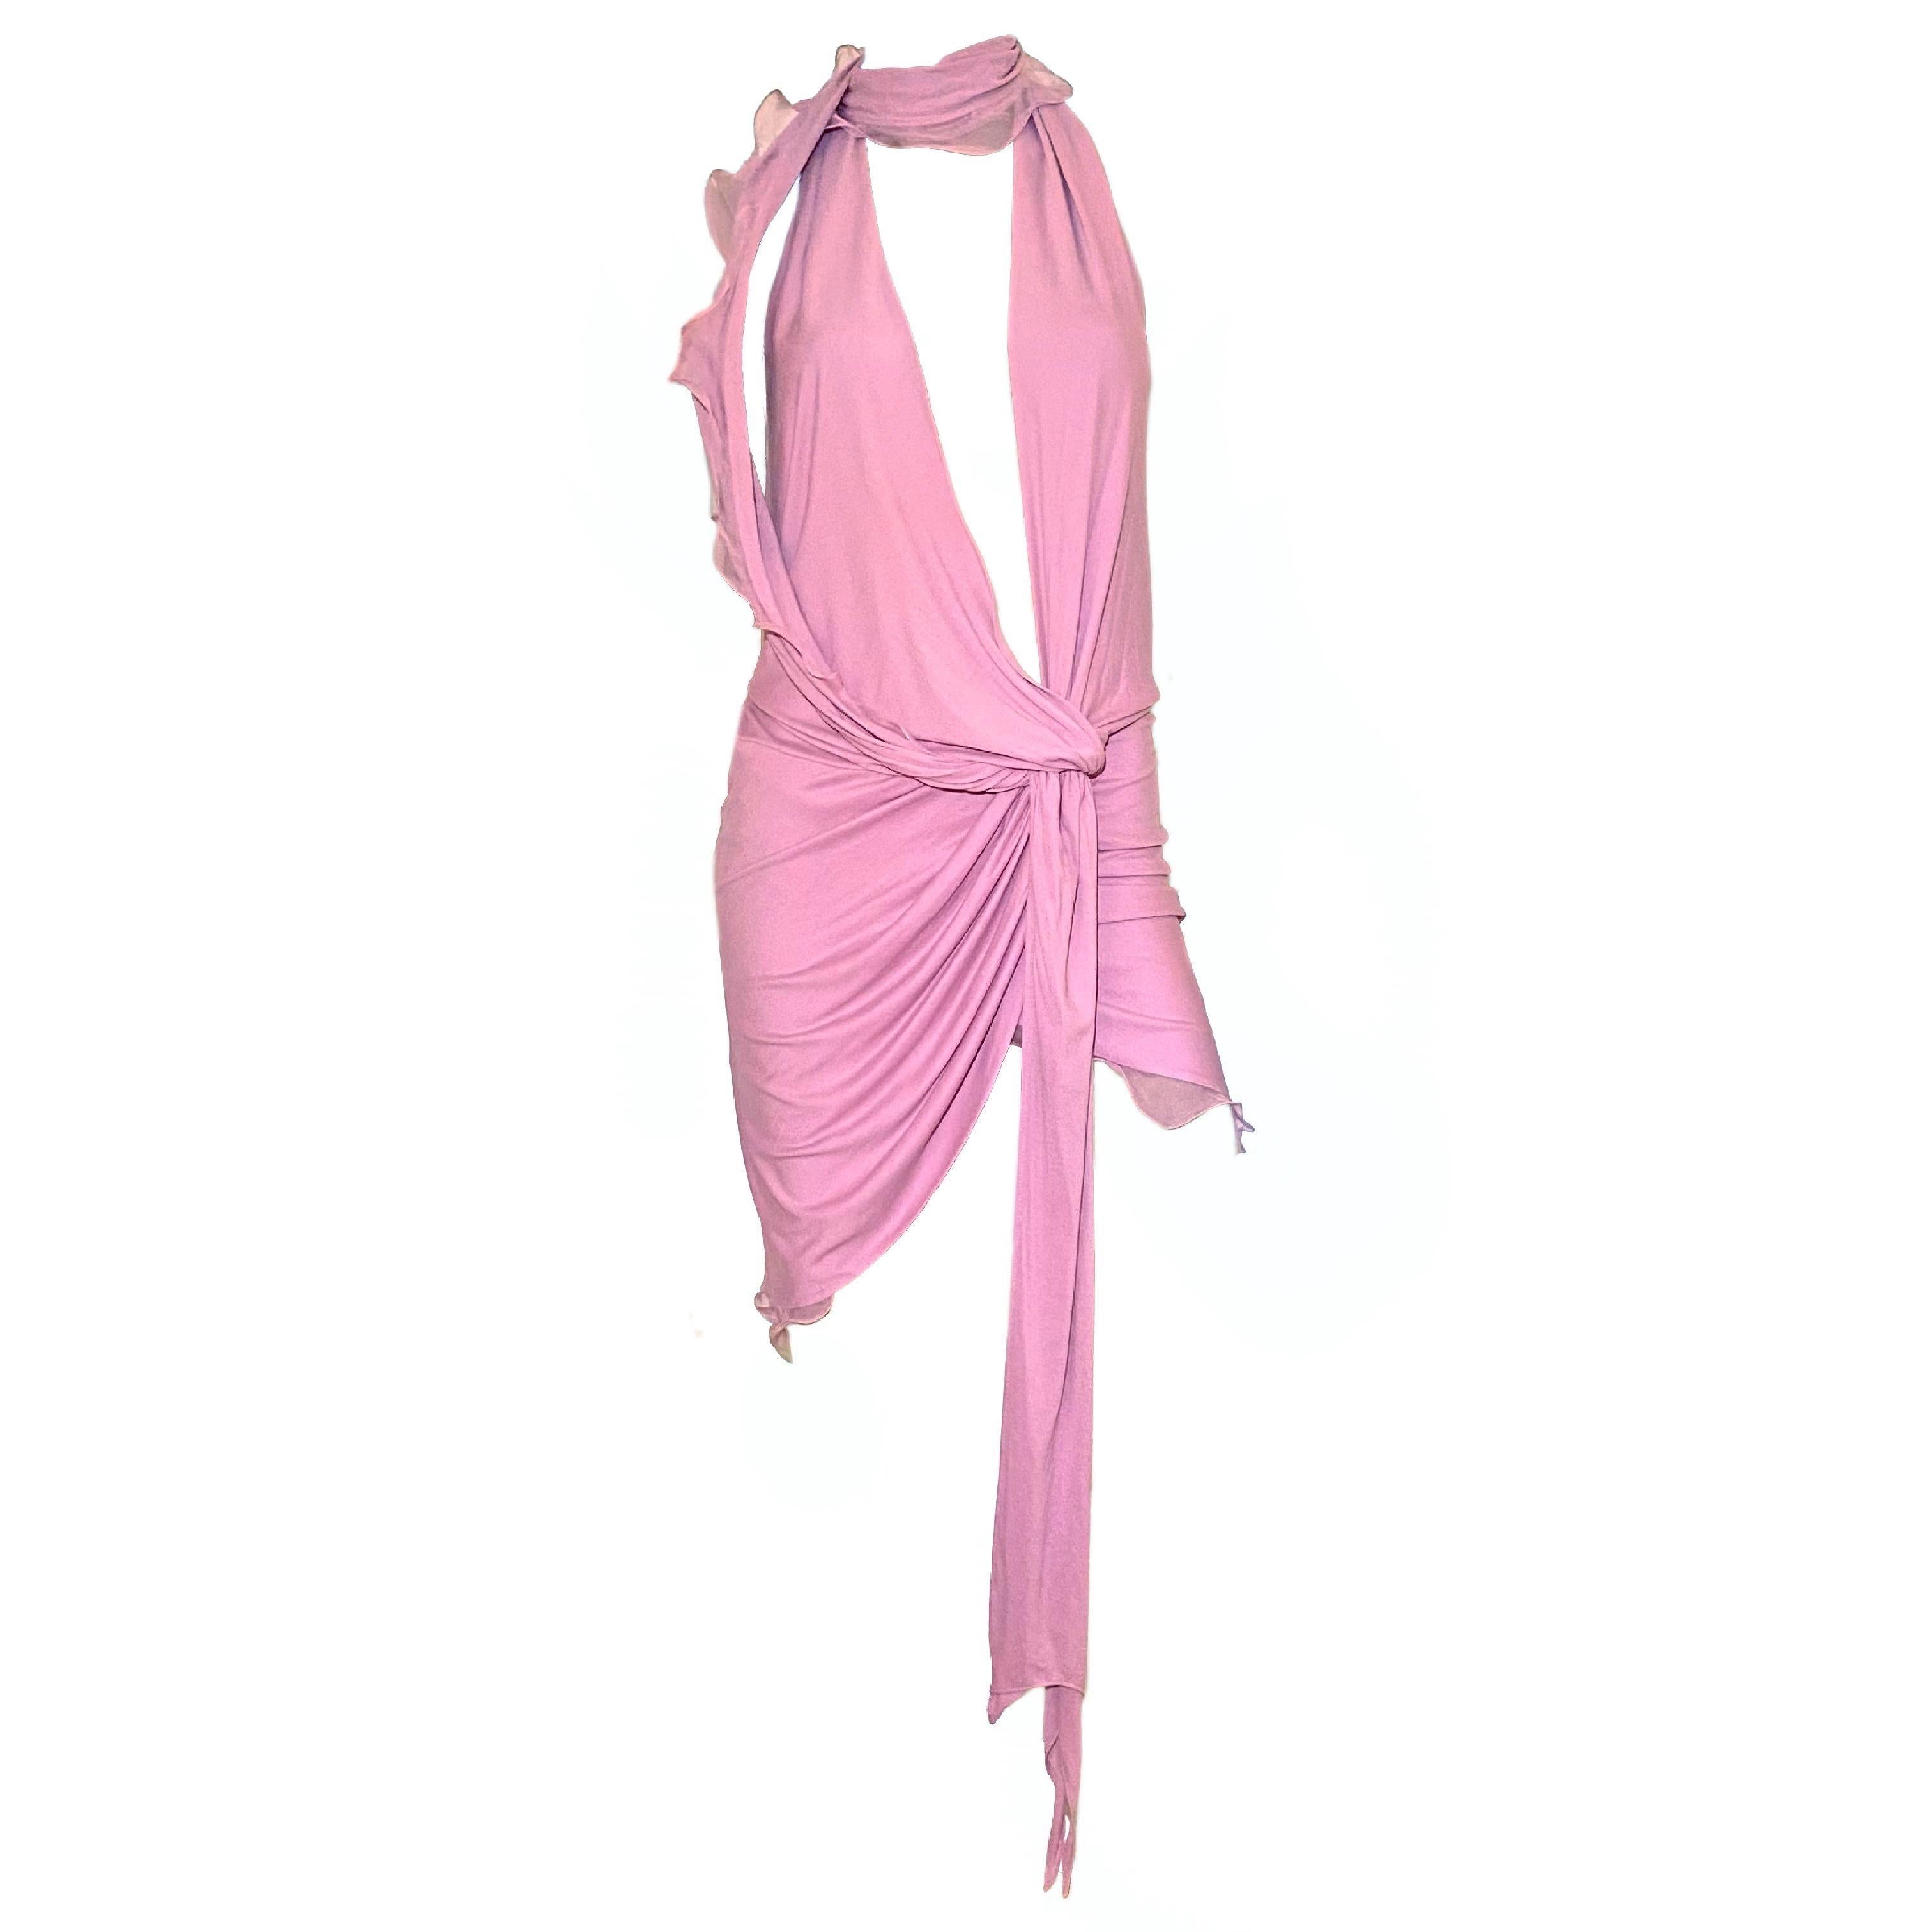 Emanuel Ungaro by Giambattista Valli pink viscose mini dress with asymmetric low plunge and front slit from Spring/Summer 2004 (look 01, worn by Larissa Castro)

•Waist knot tie with waistline draping
•Shoulder band (can be wrapped around the neck